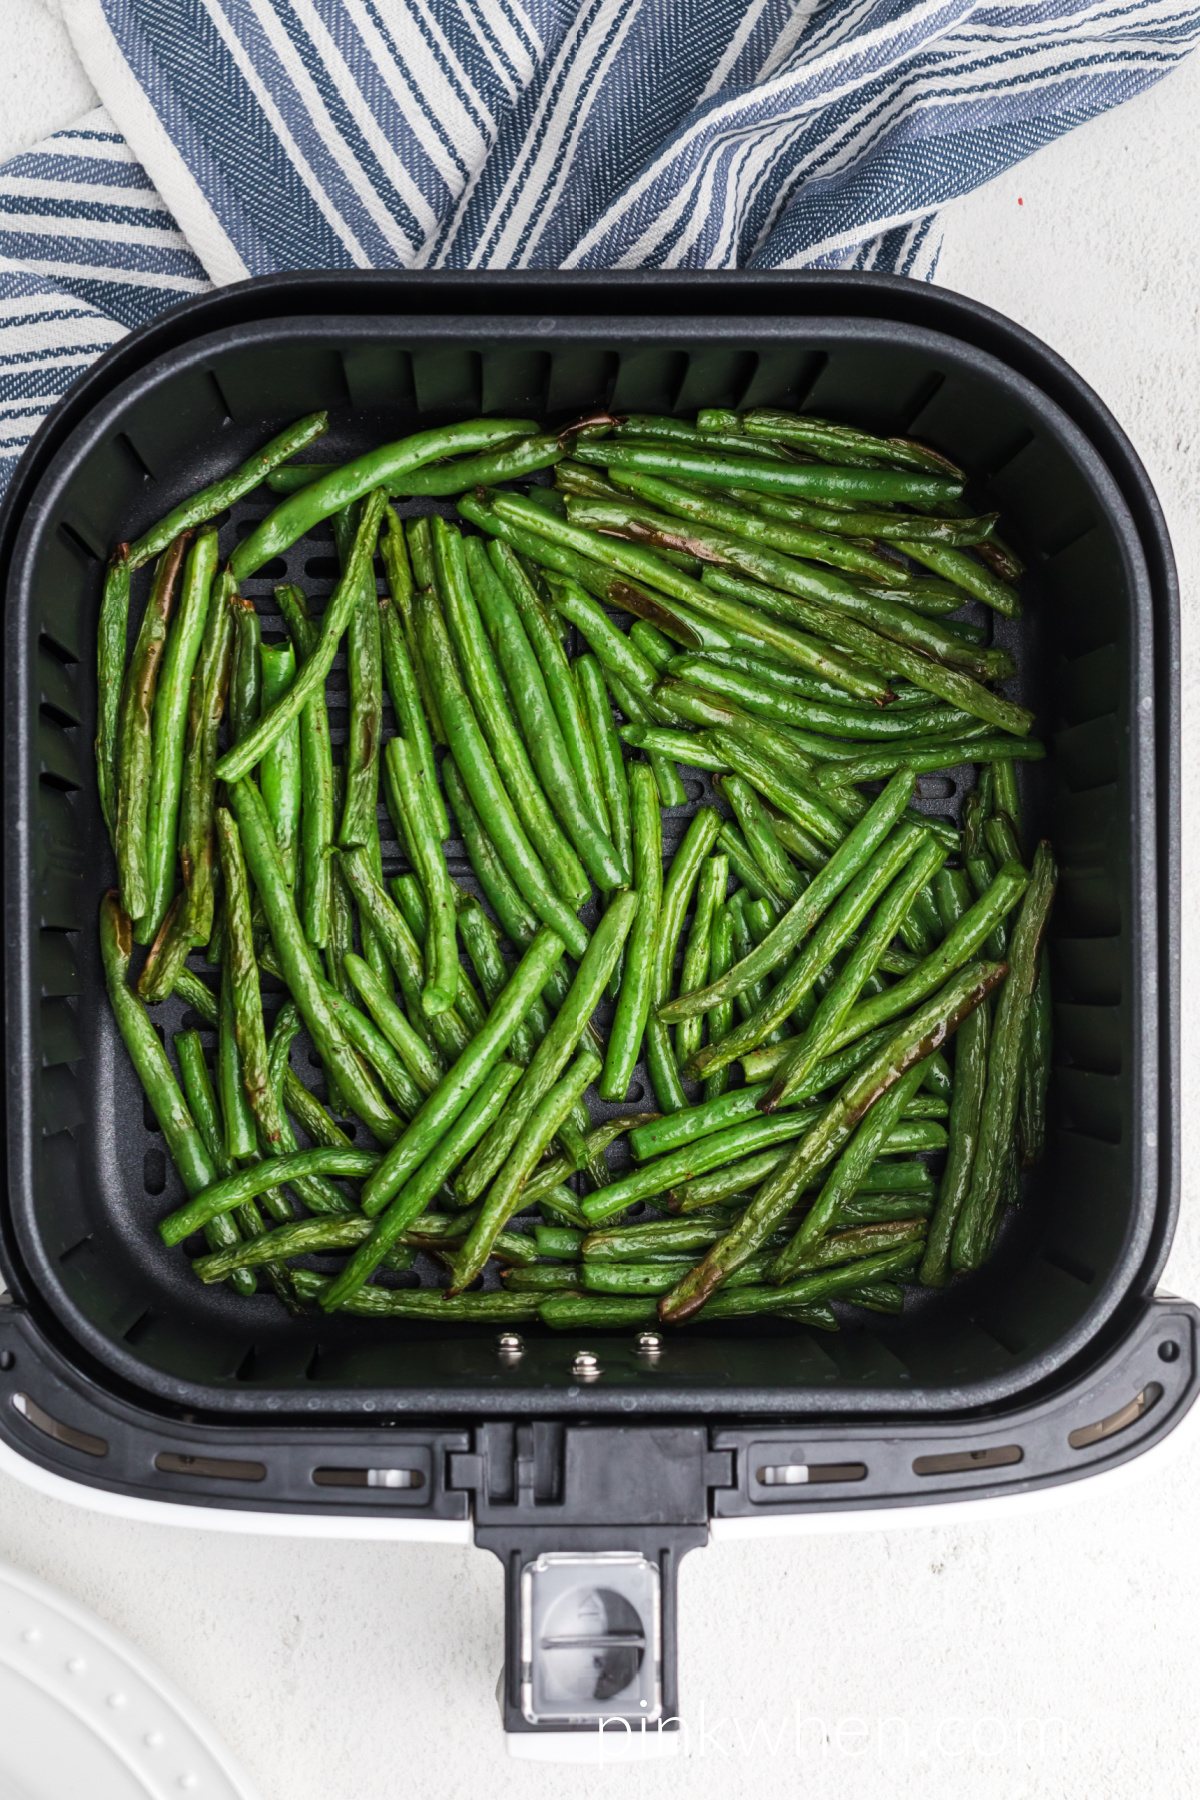 Fully cooked fried green beans in air fryer basket. 